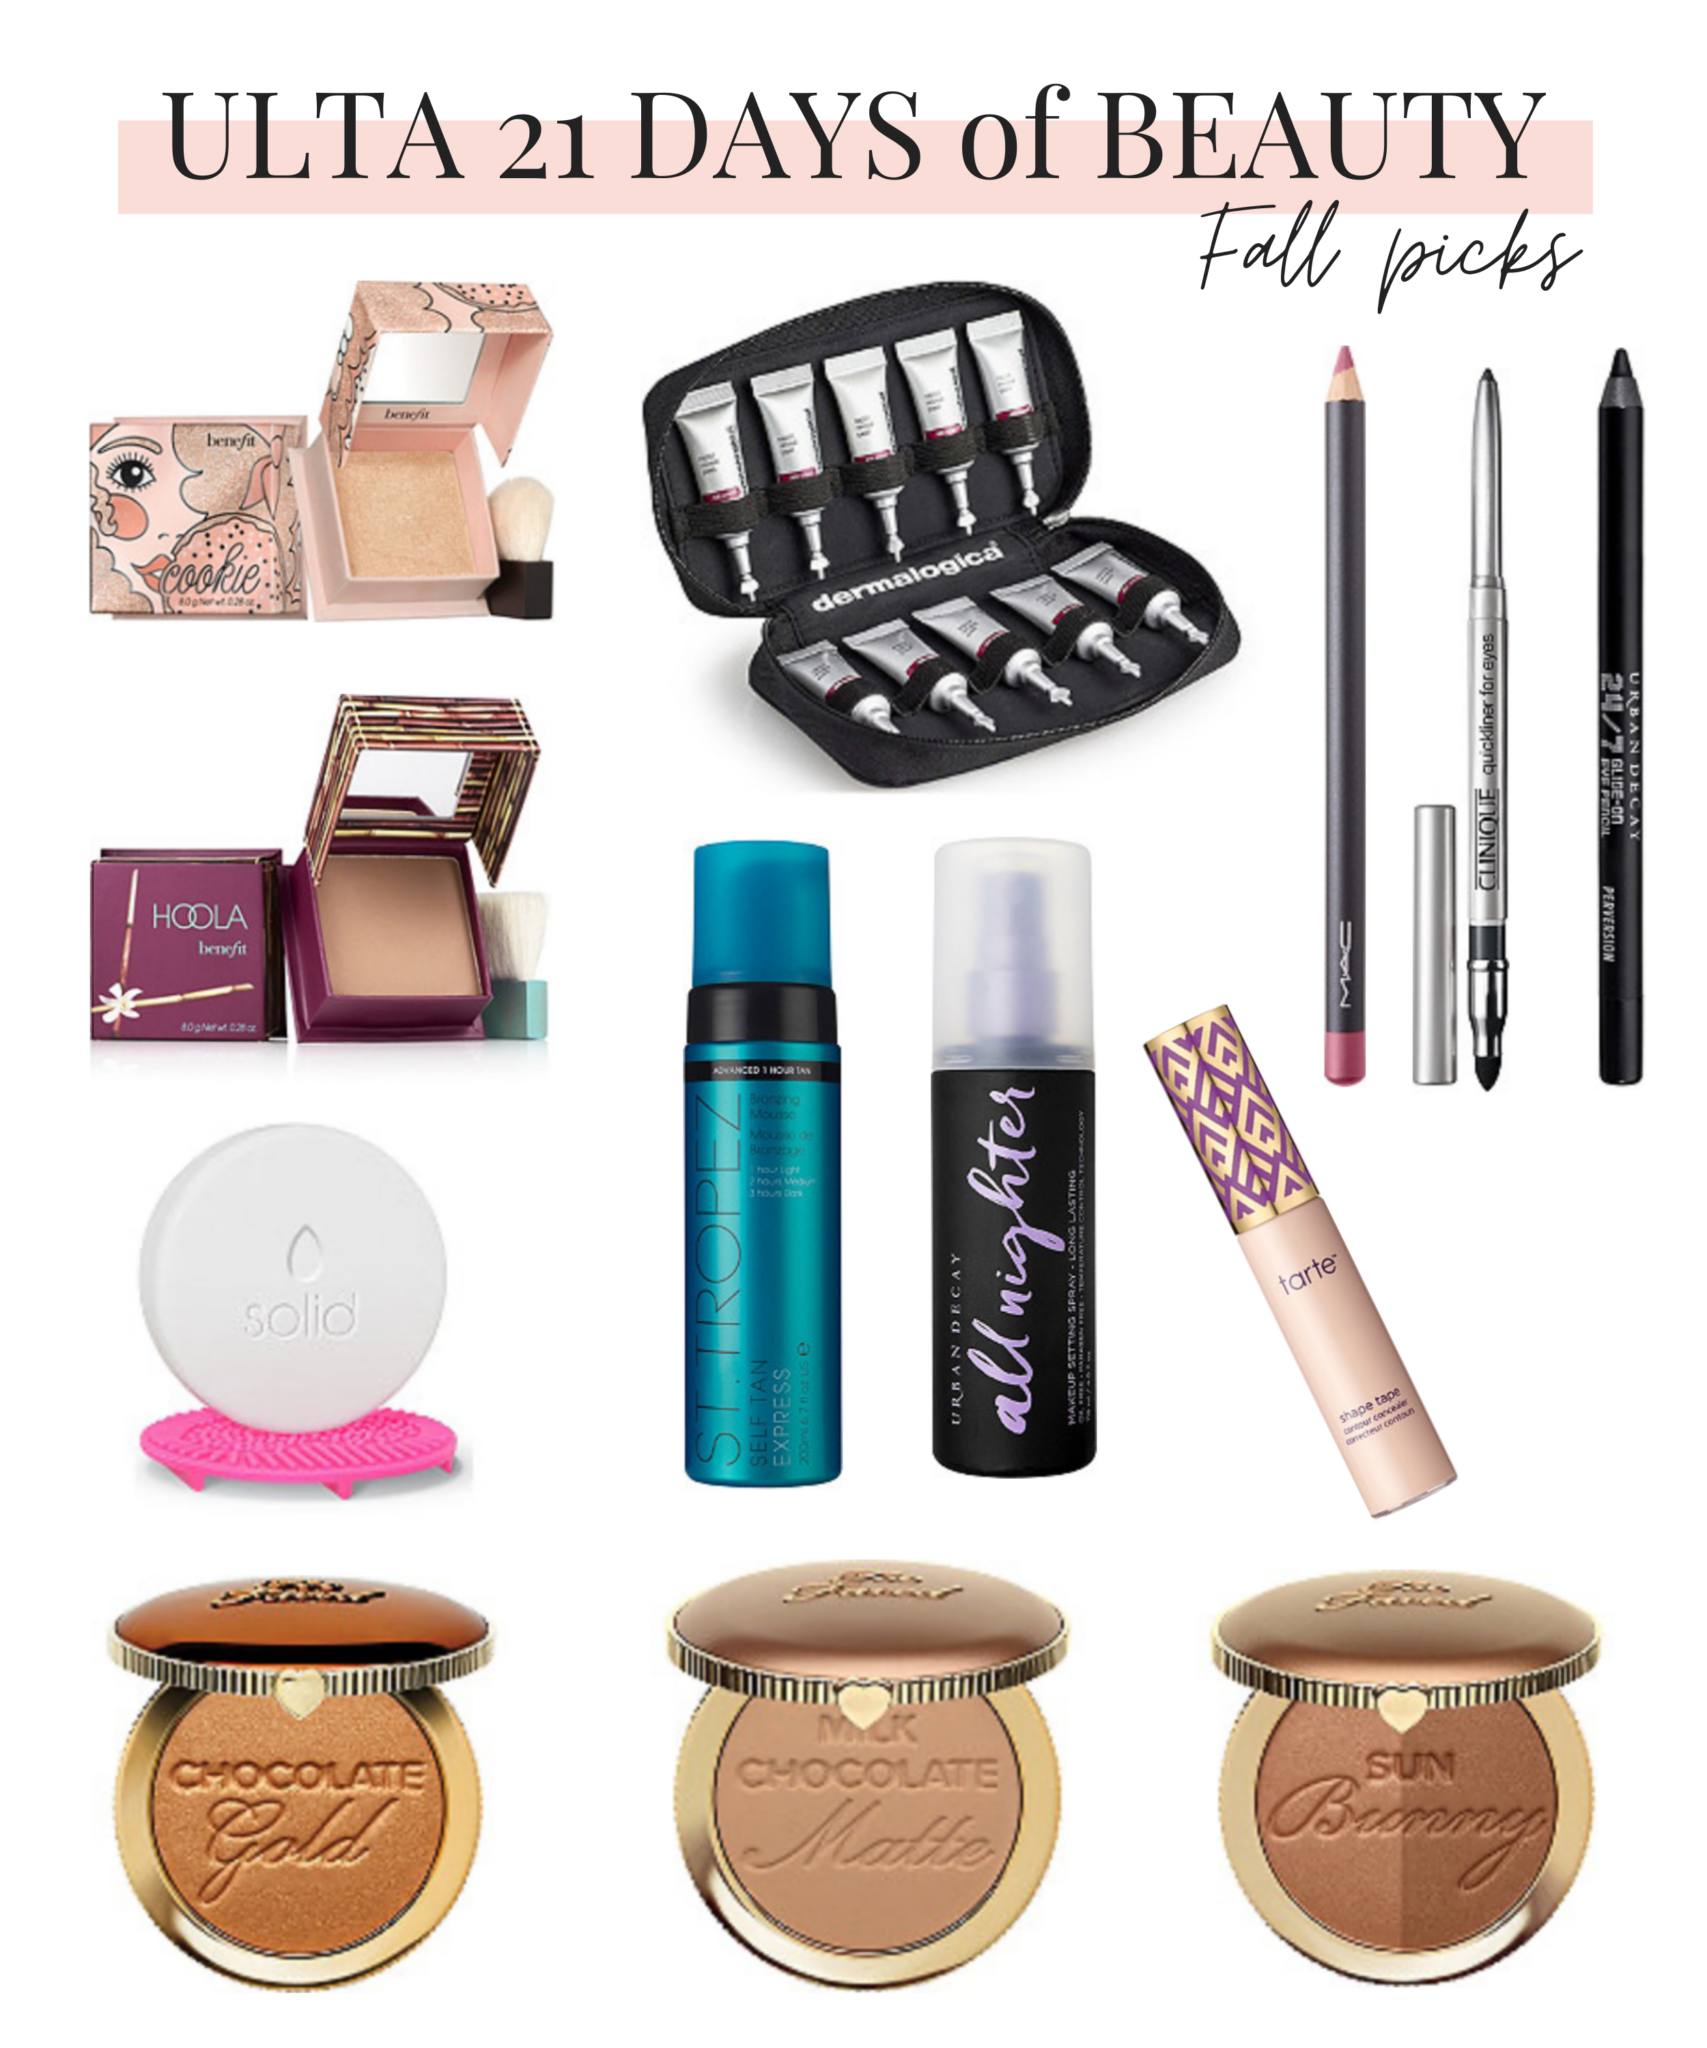 Ulta 21 Days of Beauty Fall 2020 Best Sale Items My Styled Life